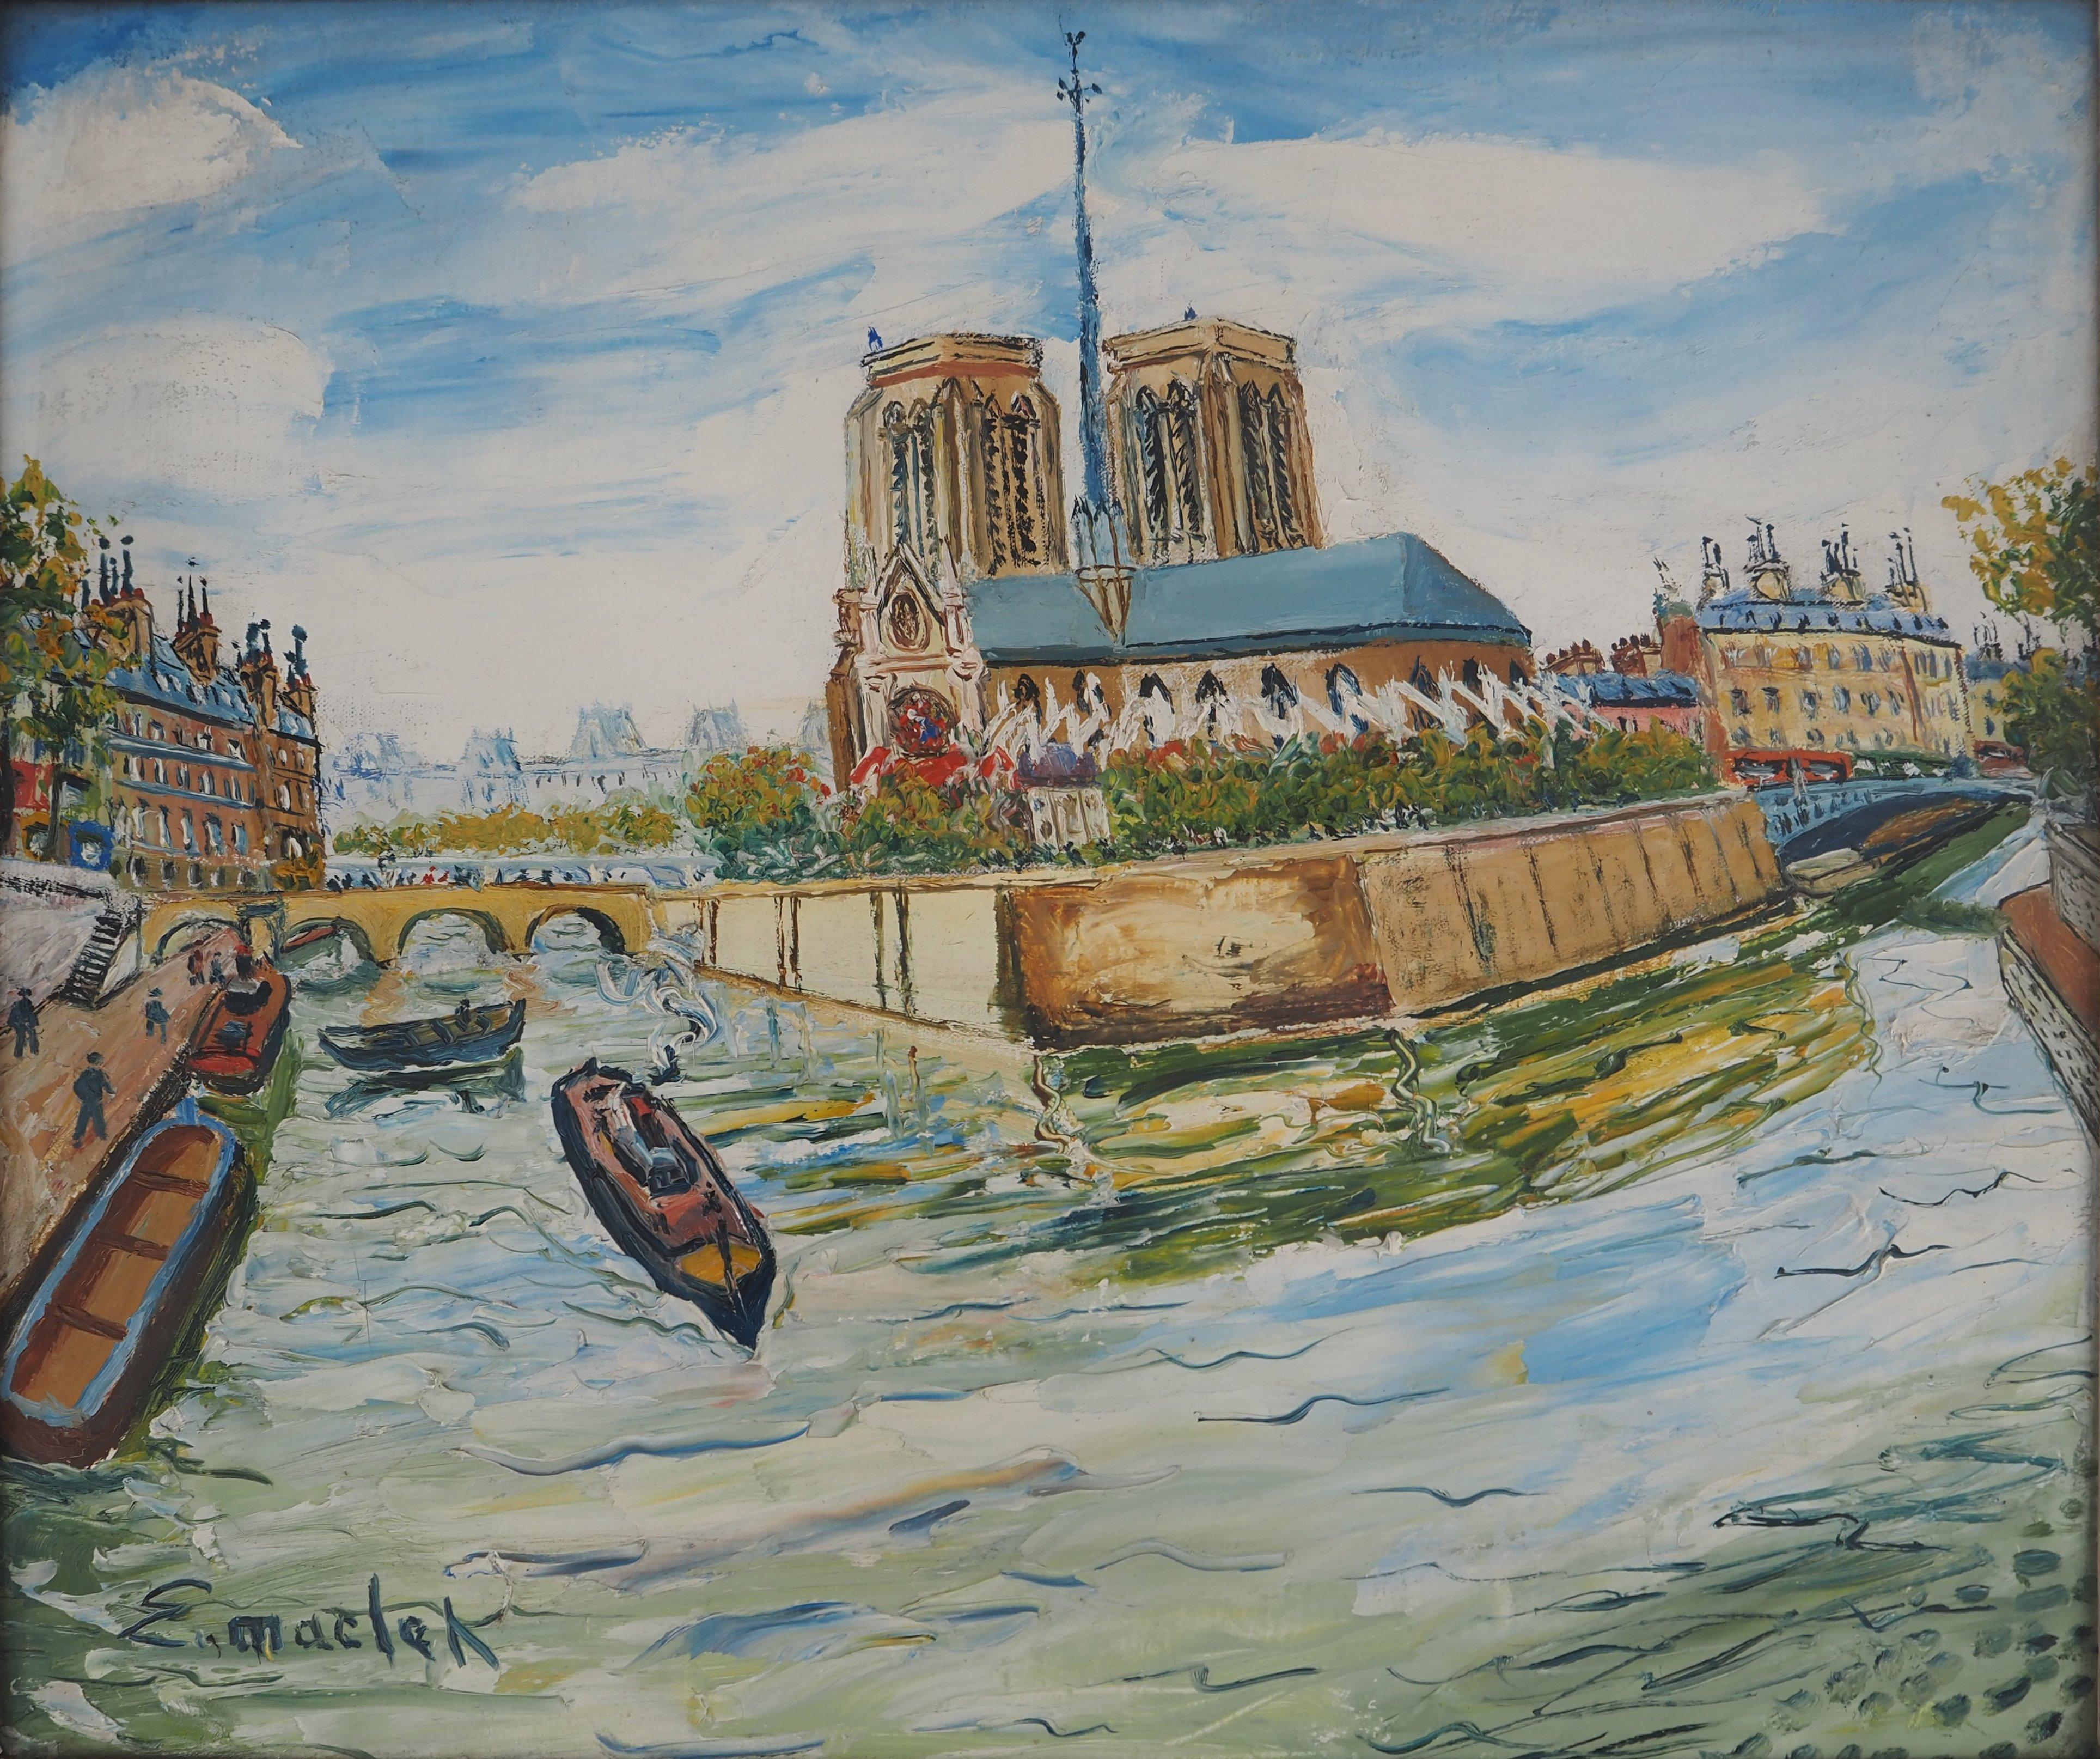 Summer in Paris : Notre Dame Church and Seine River - Oil on canvas - Signed - Painting by Elisée Maclet